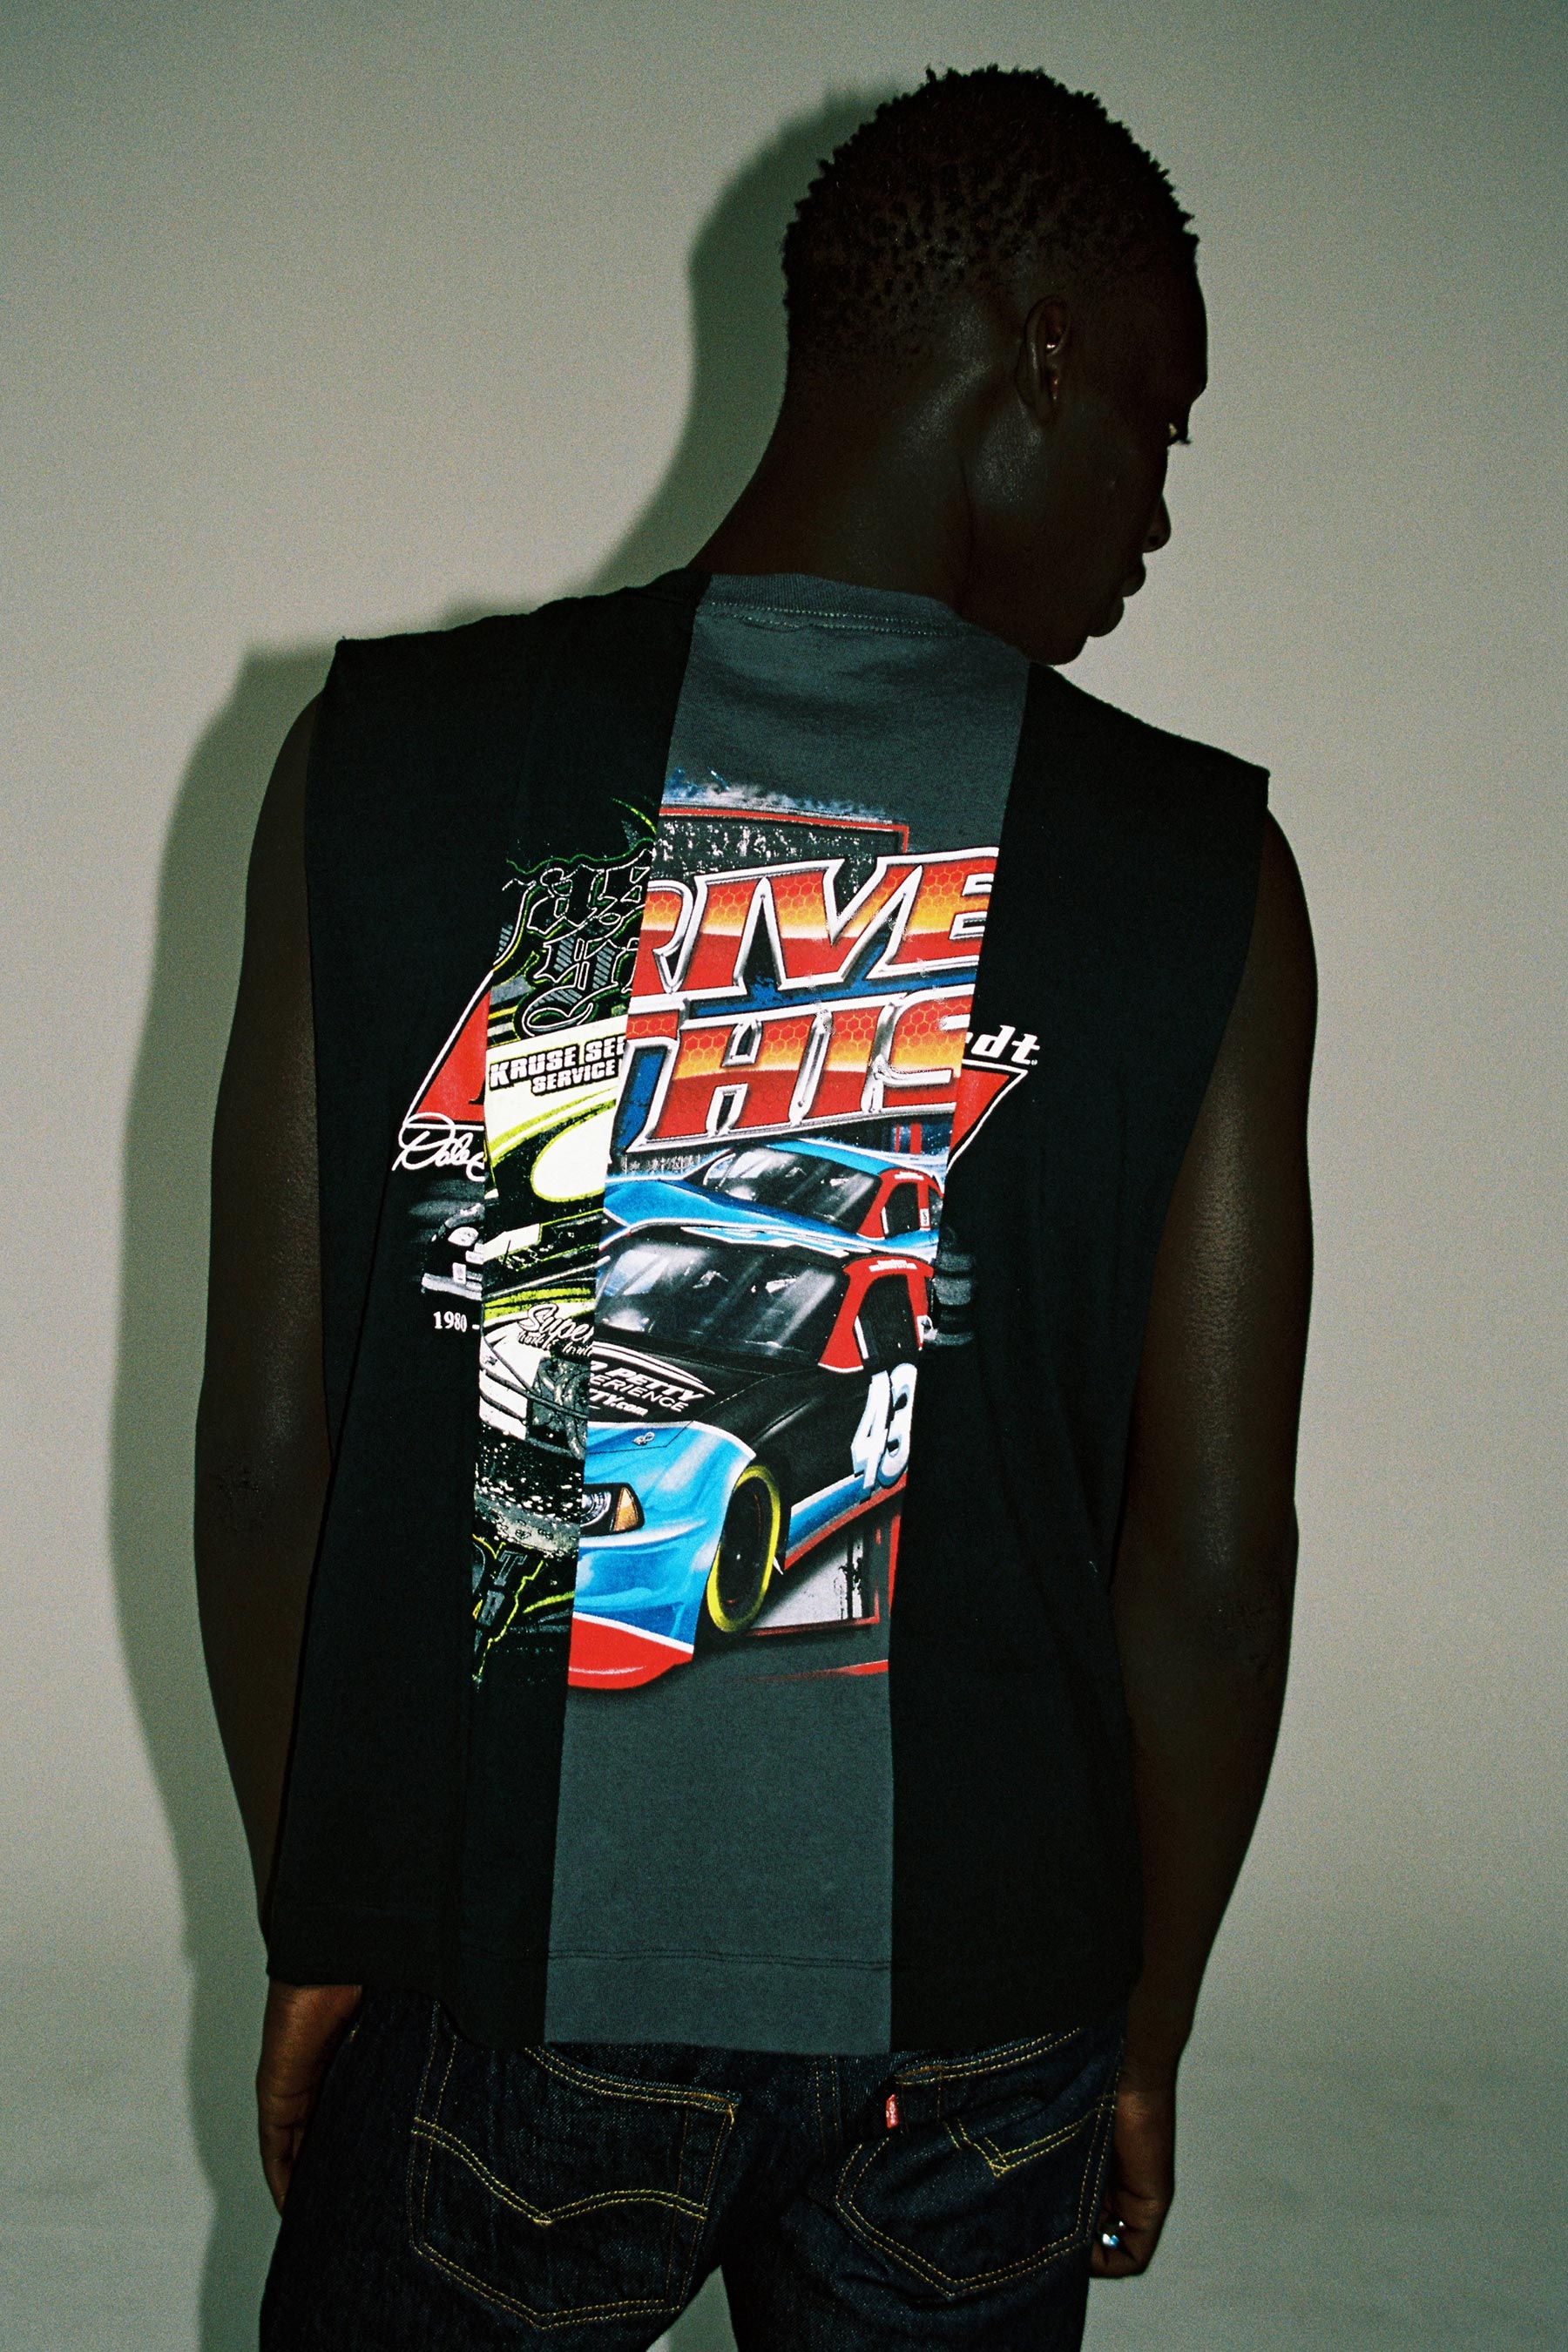 RE-edited Racing Printed Collage Rectangle Tank Tops